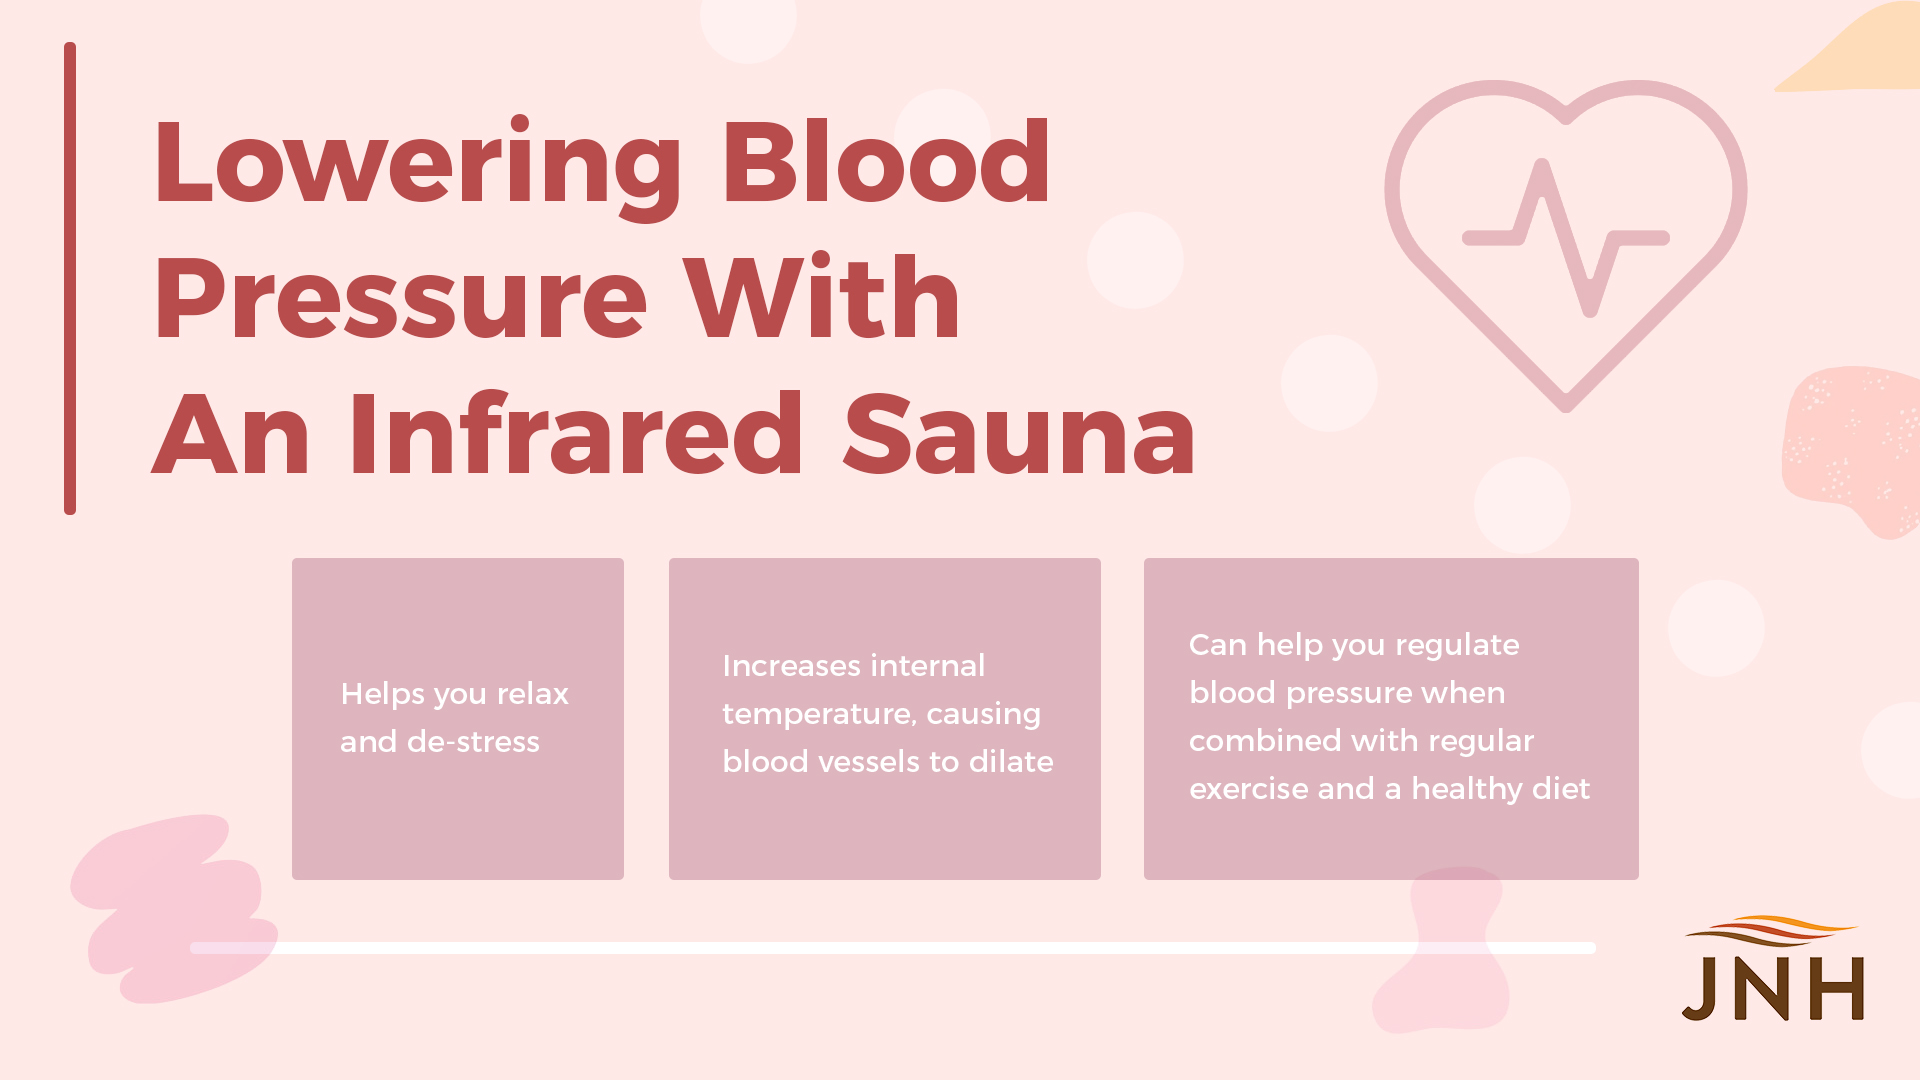 Lowering Blood Pressure With An Infrared Sauna: increases internal temperature, causing blood vessels to dilate, helps you relax and de-stress, can help you regulate blood pressure when combined with regular exercise and a healthy diet